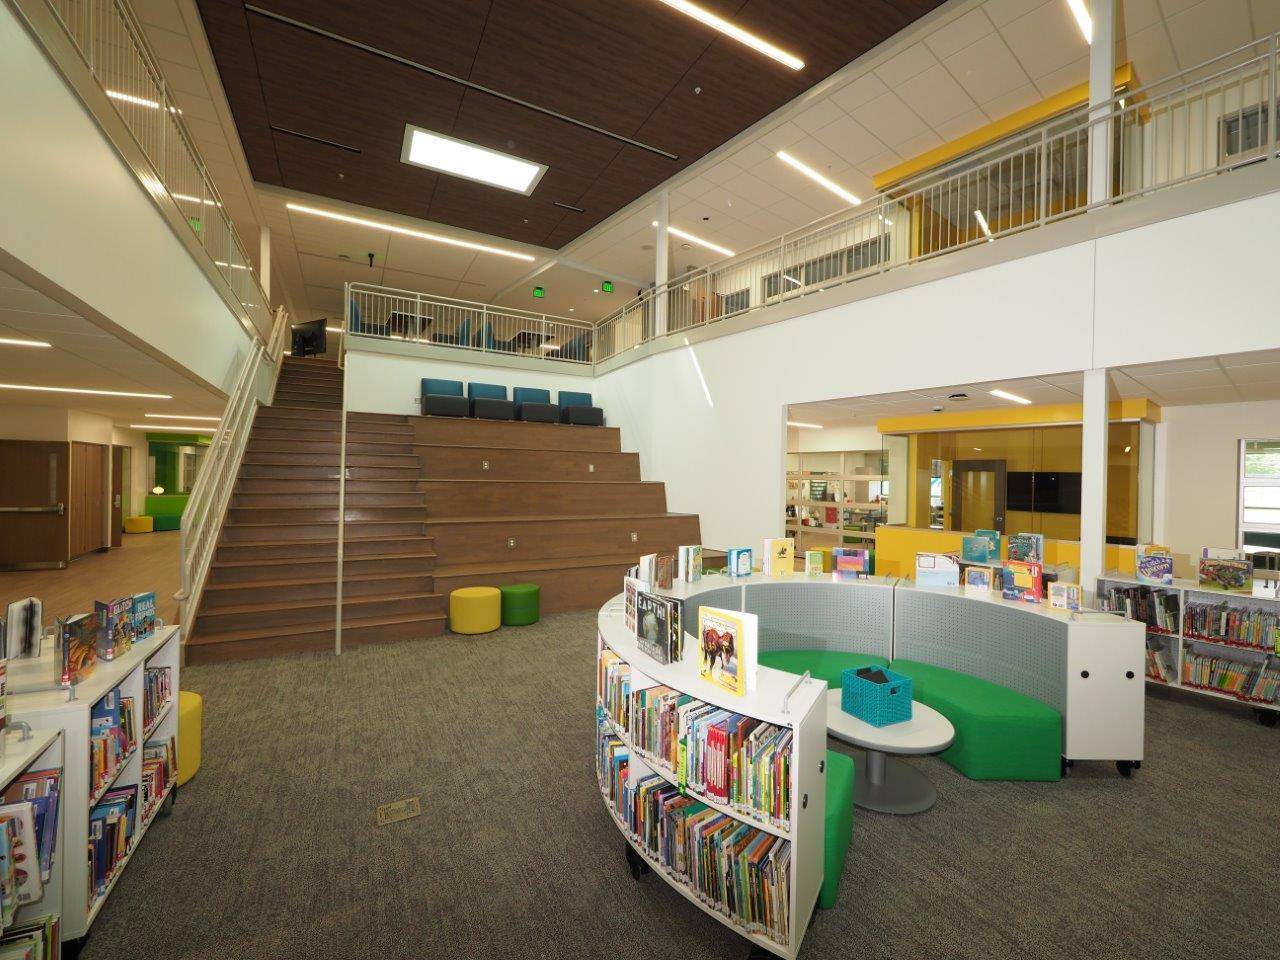 The new media center, with learning stairs